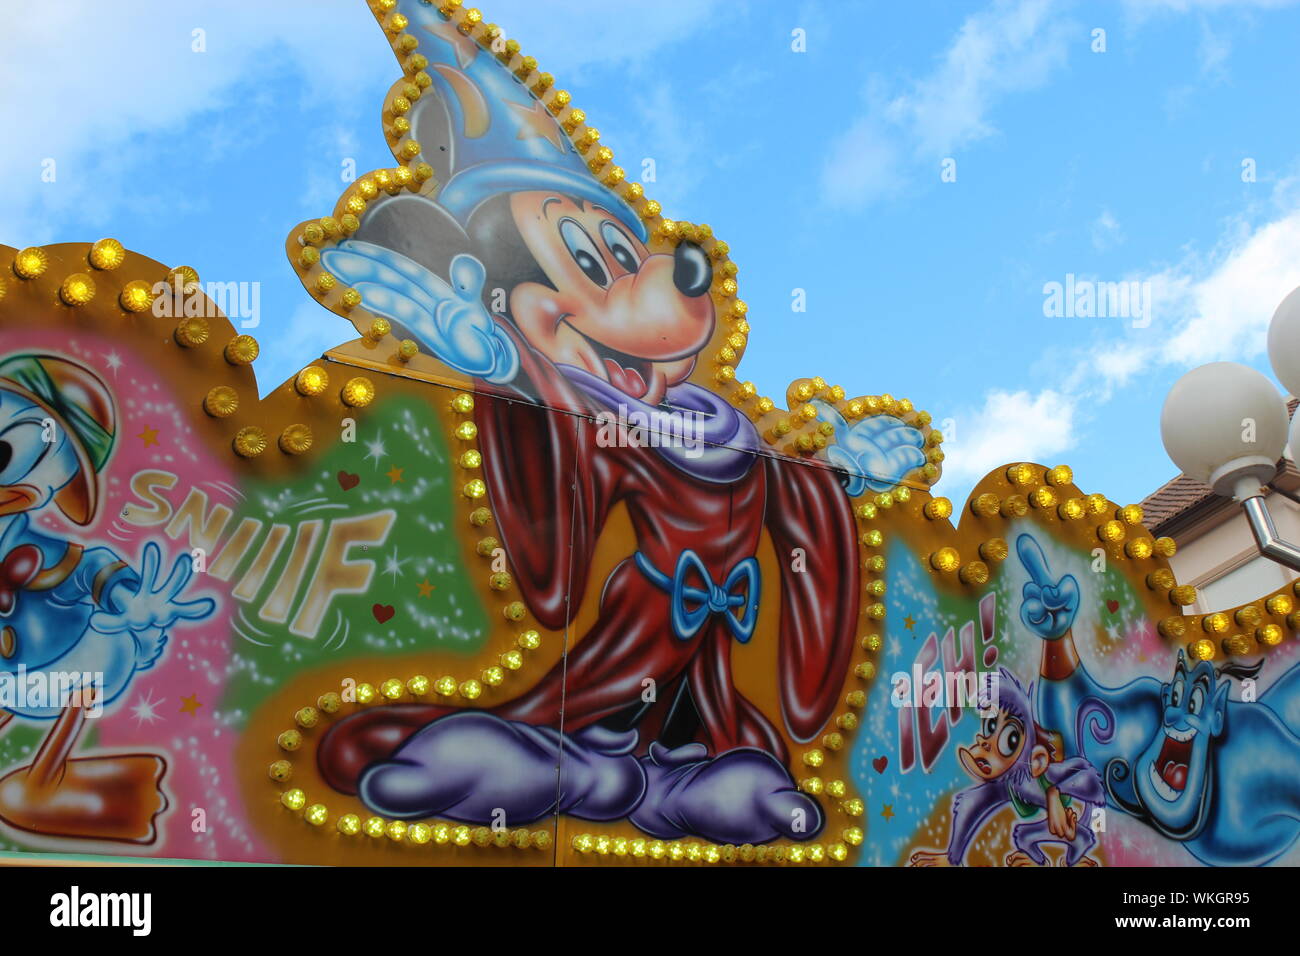 Disney characters on rides at a carnival in Gandia, Spain during Las Fallas. Stock Photo